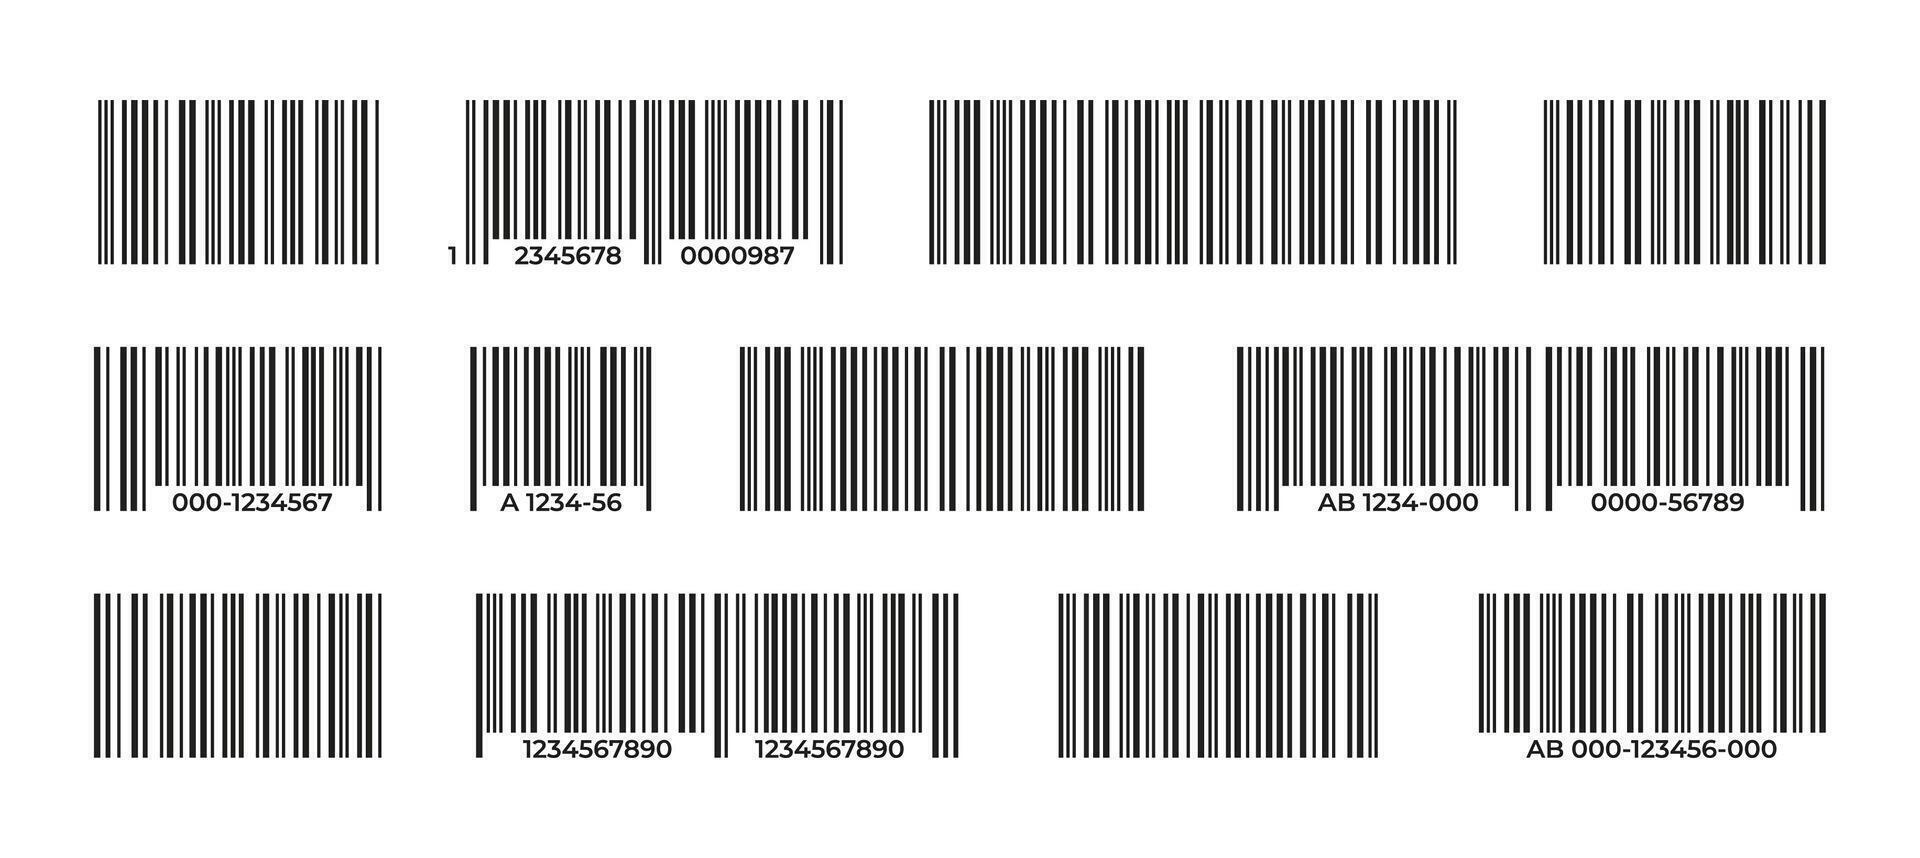 Barcodes collection. Black label barcode for product identification, grocery price tag, supermarket distribution system with row data elements. Vector set